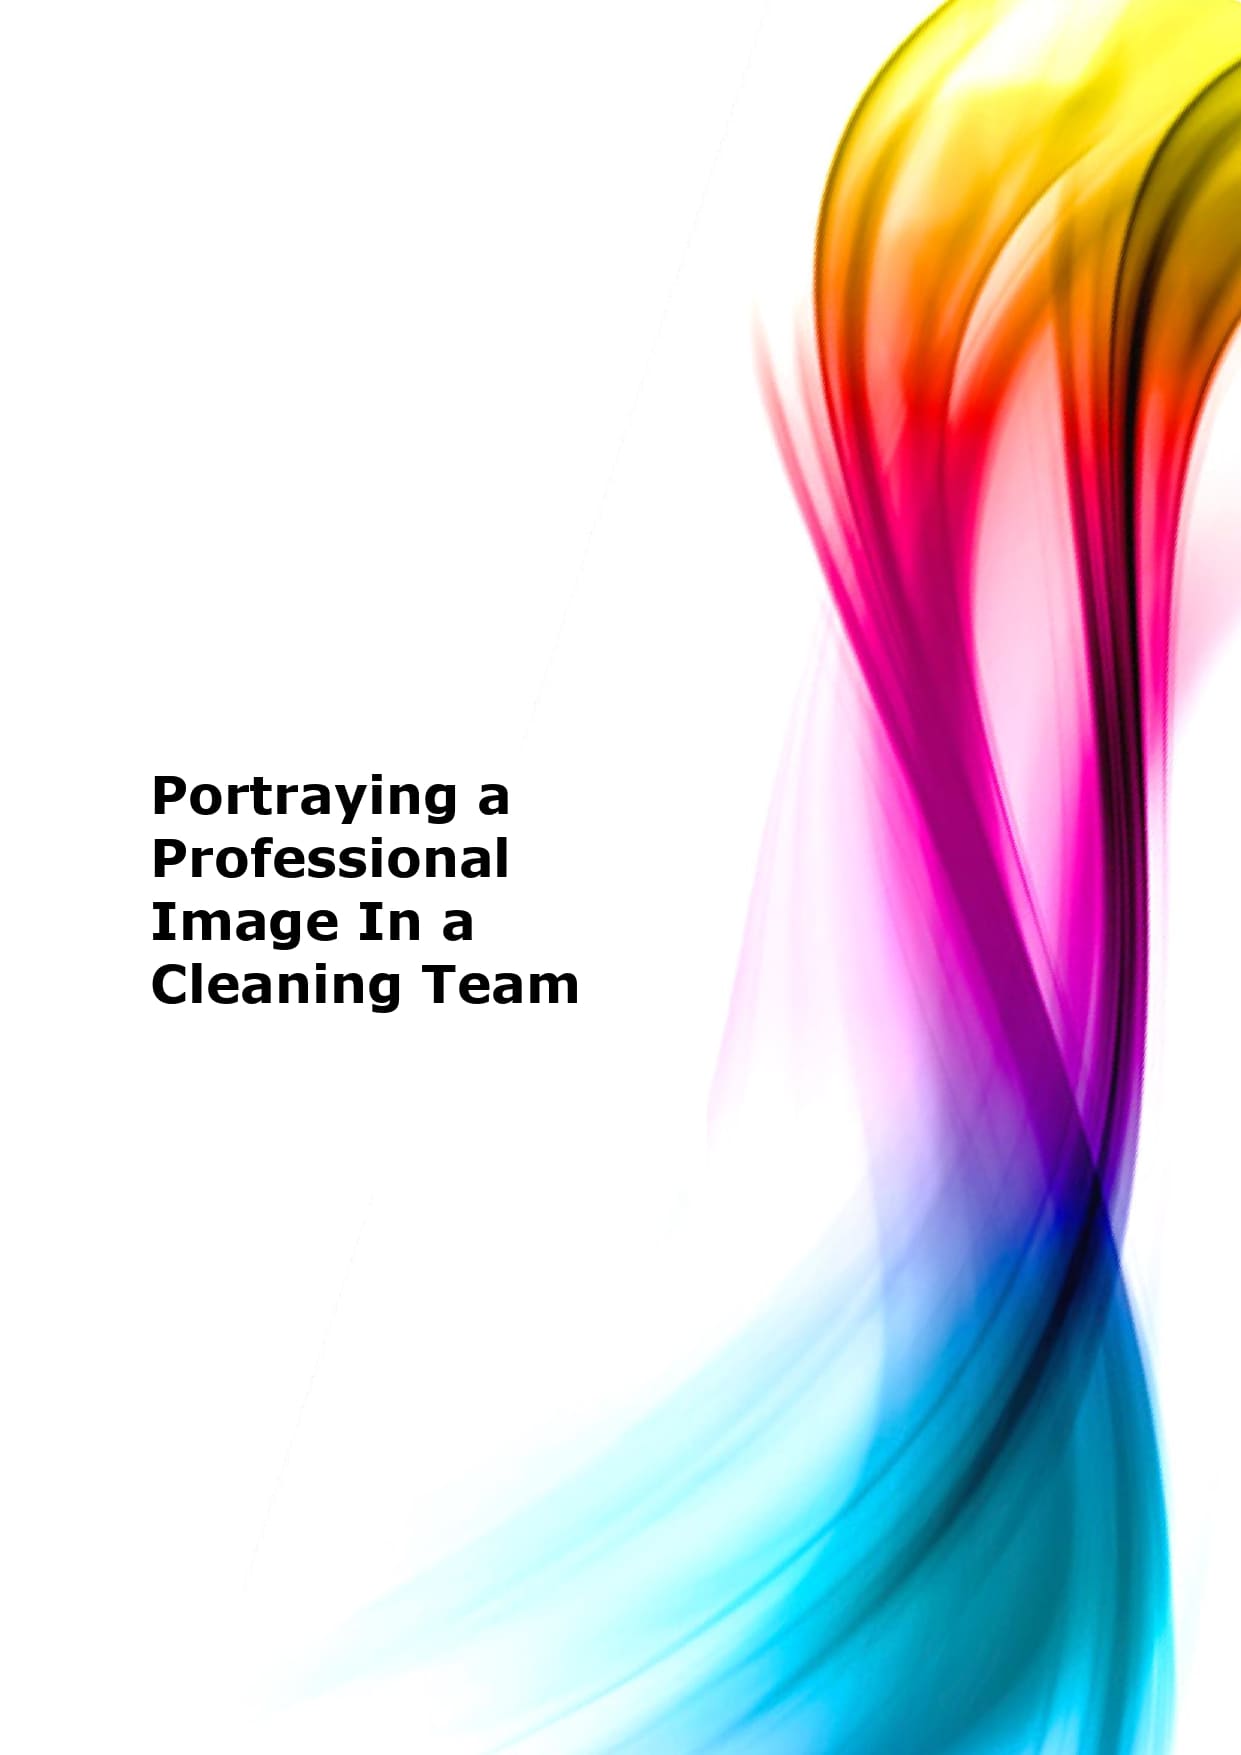 Portraying a professional image in a cleaning team